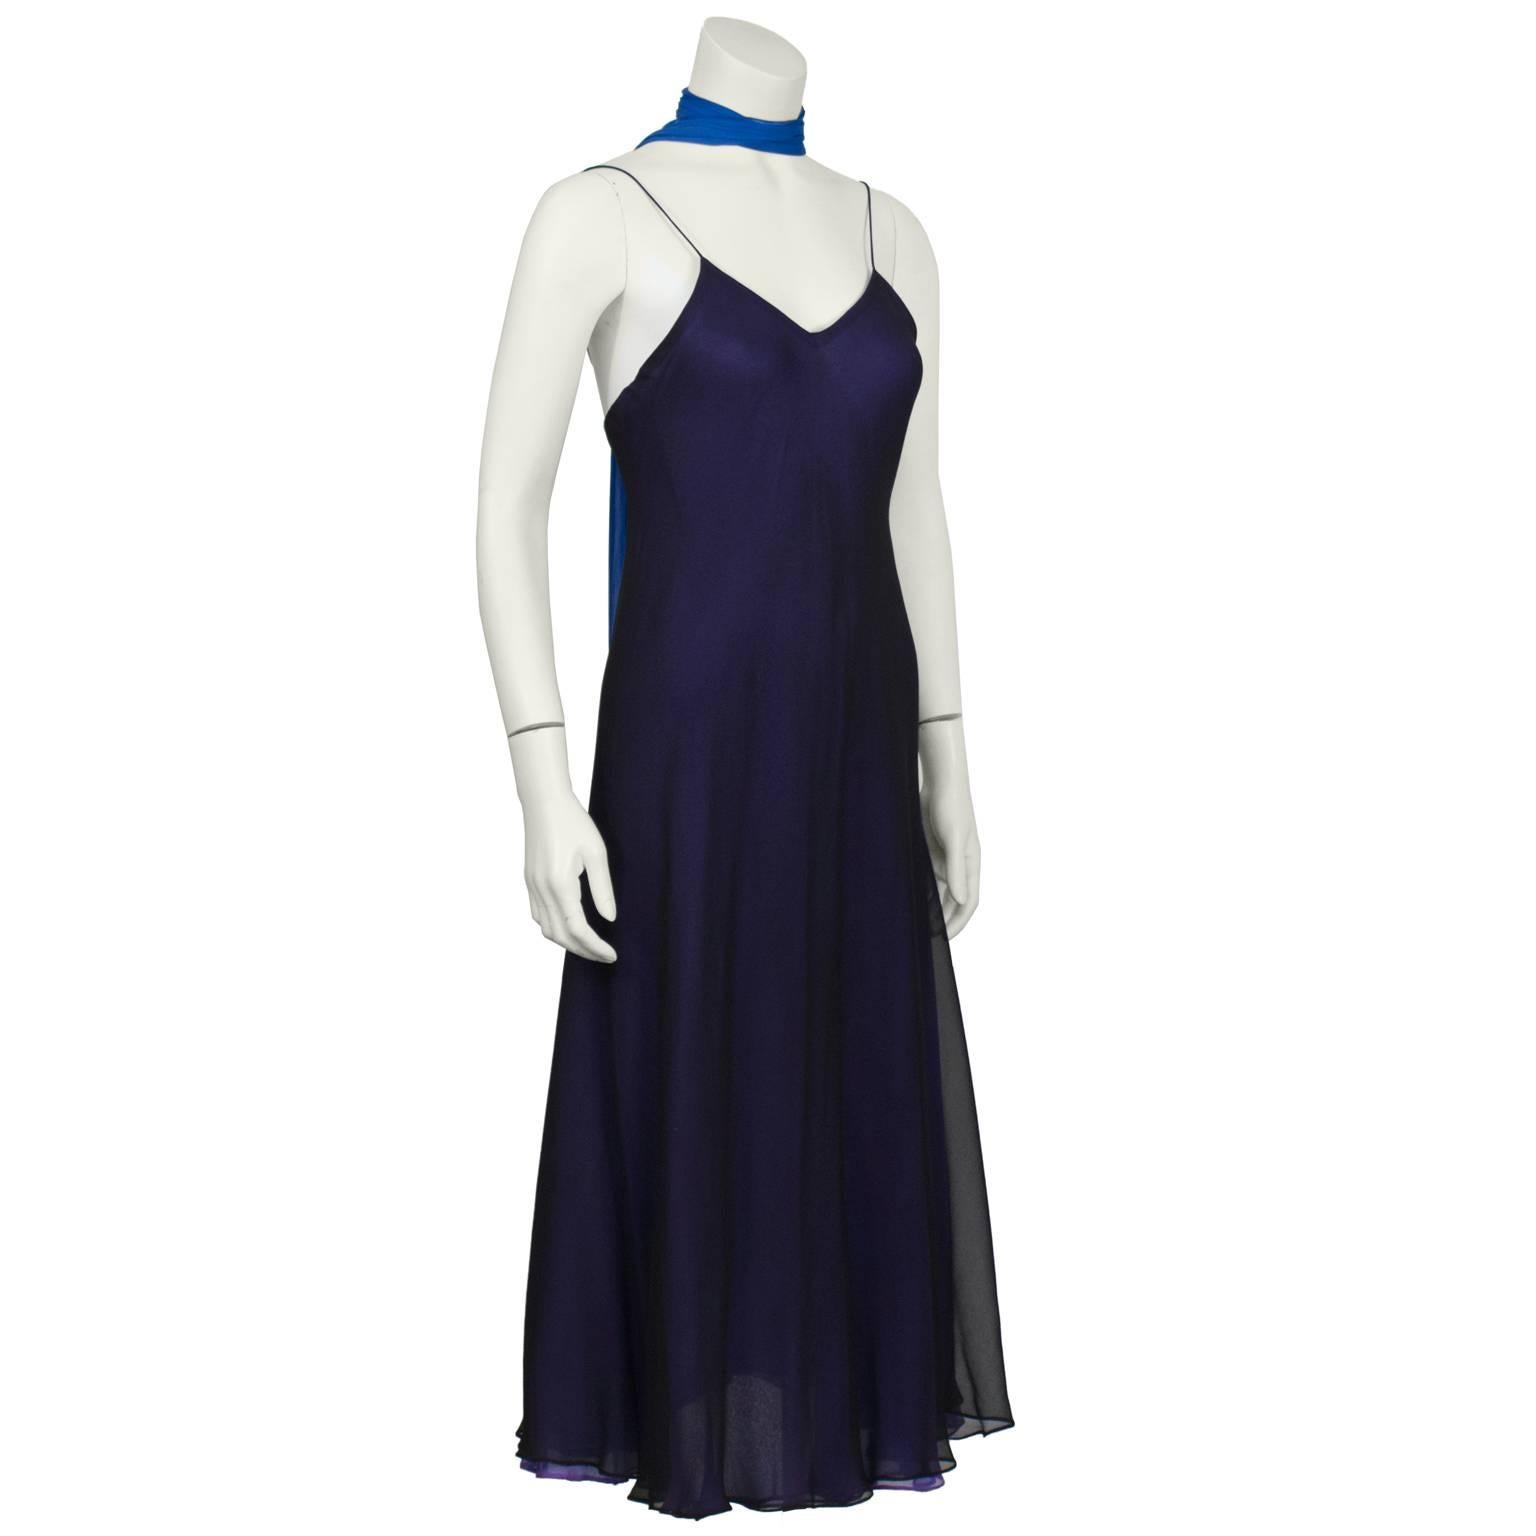 1970's George Stavropoulos bias cut navy triple layer chiffon slip dress. Purple and royal blue under layers add dimension to the top navy layer. Matching royal blue sash can be worn as a belt or necktie. Narrow rolled hem finish creates a slight